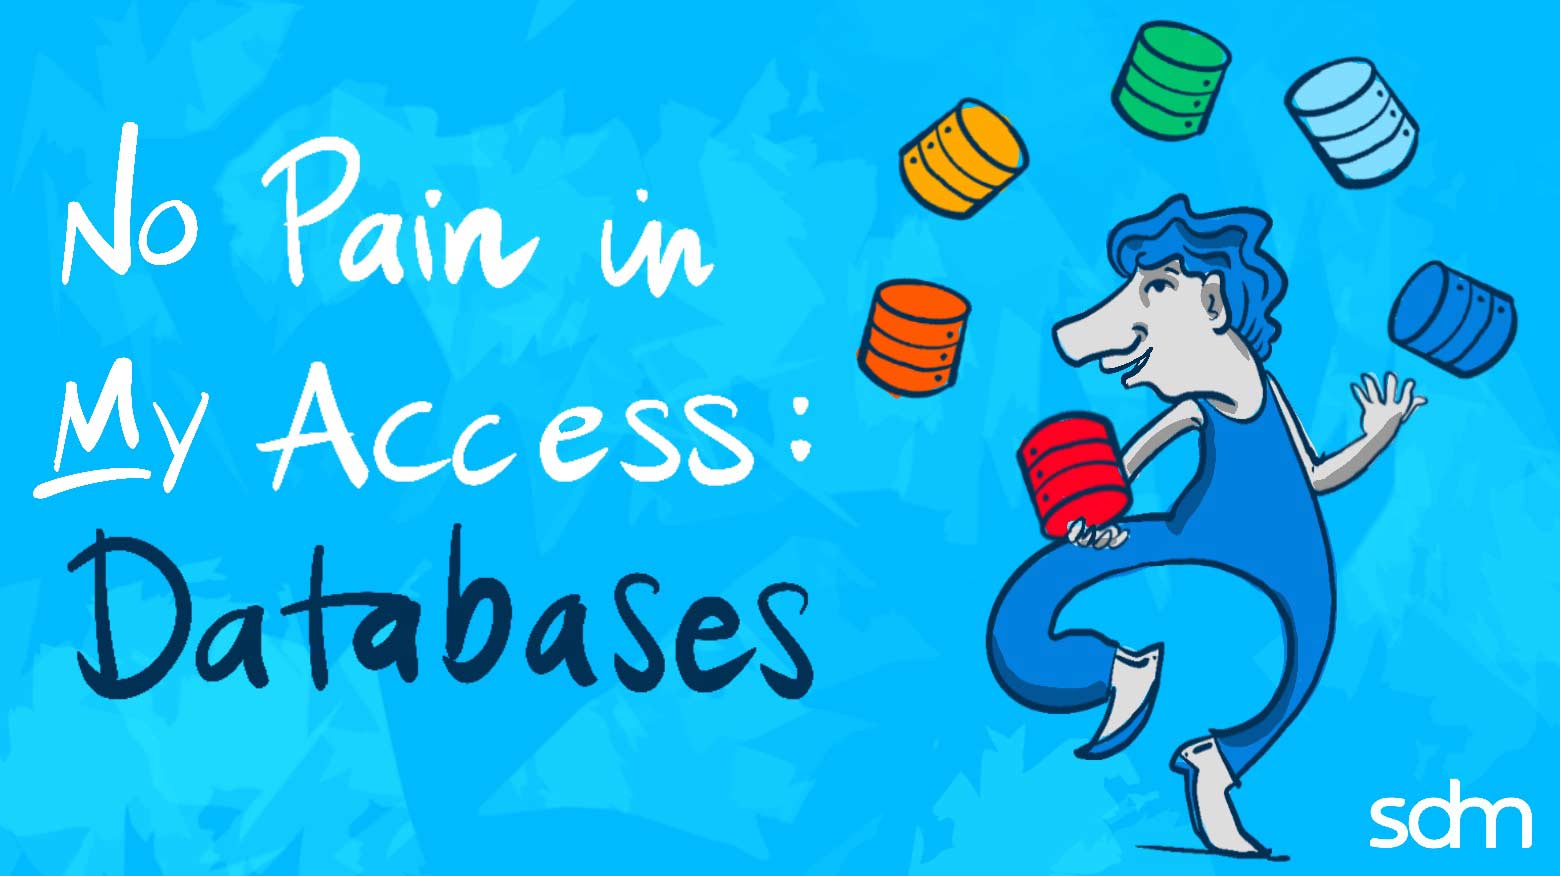 Cartoon person with blue hard and blue clothing juggling colored databases with a text "No Pain in My Access: Databases" next to him